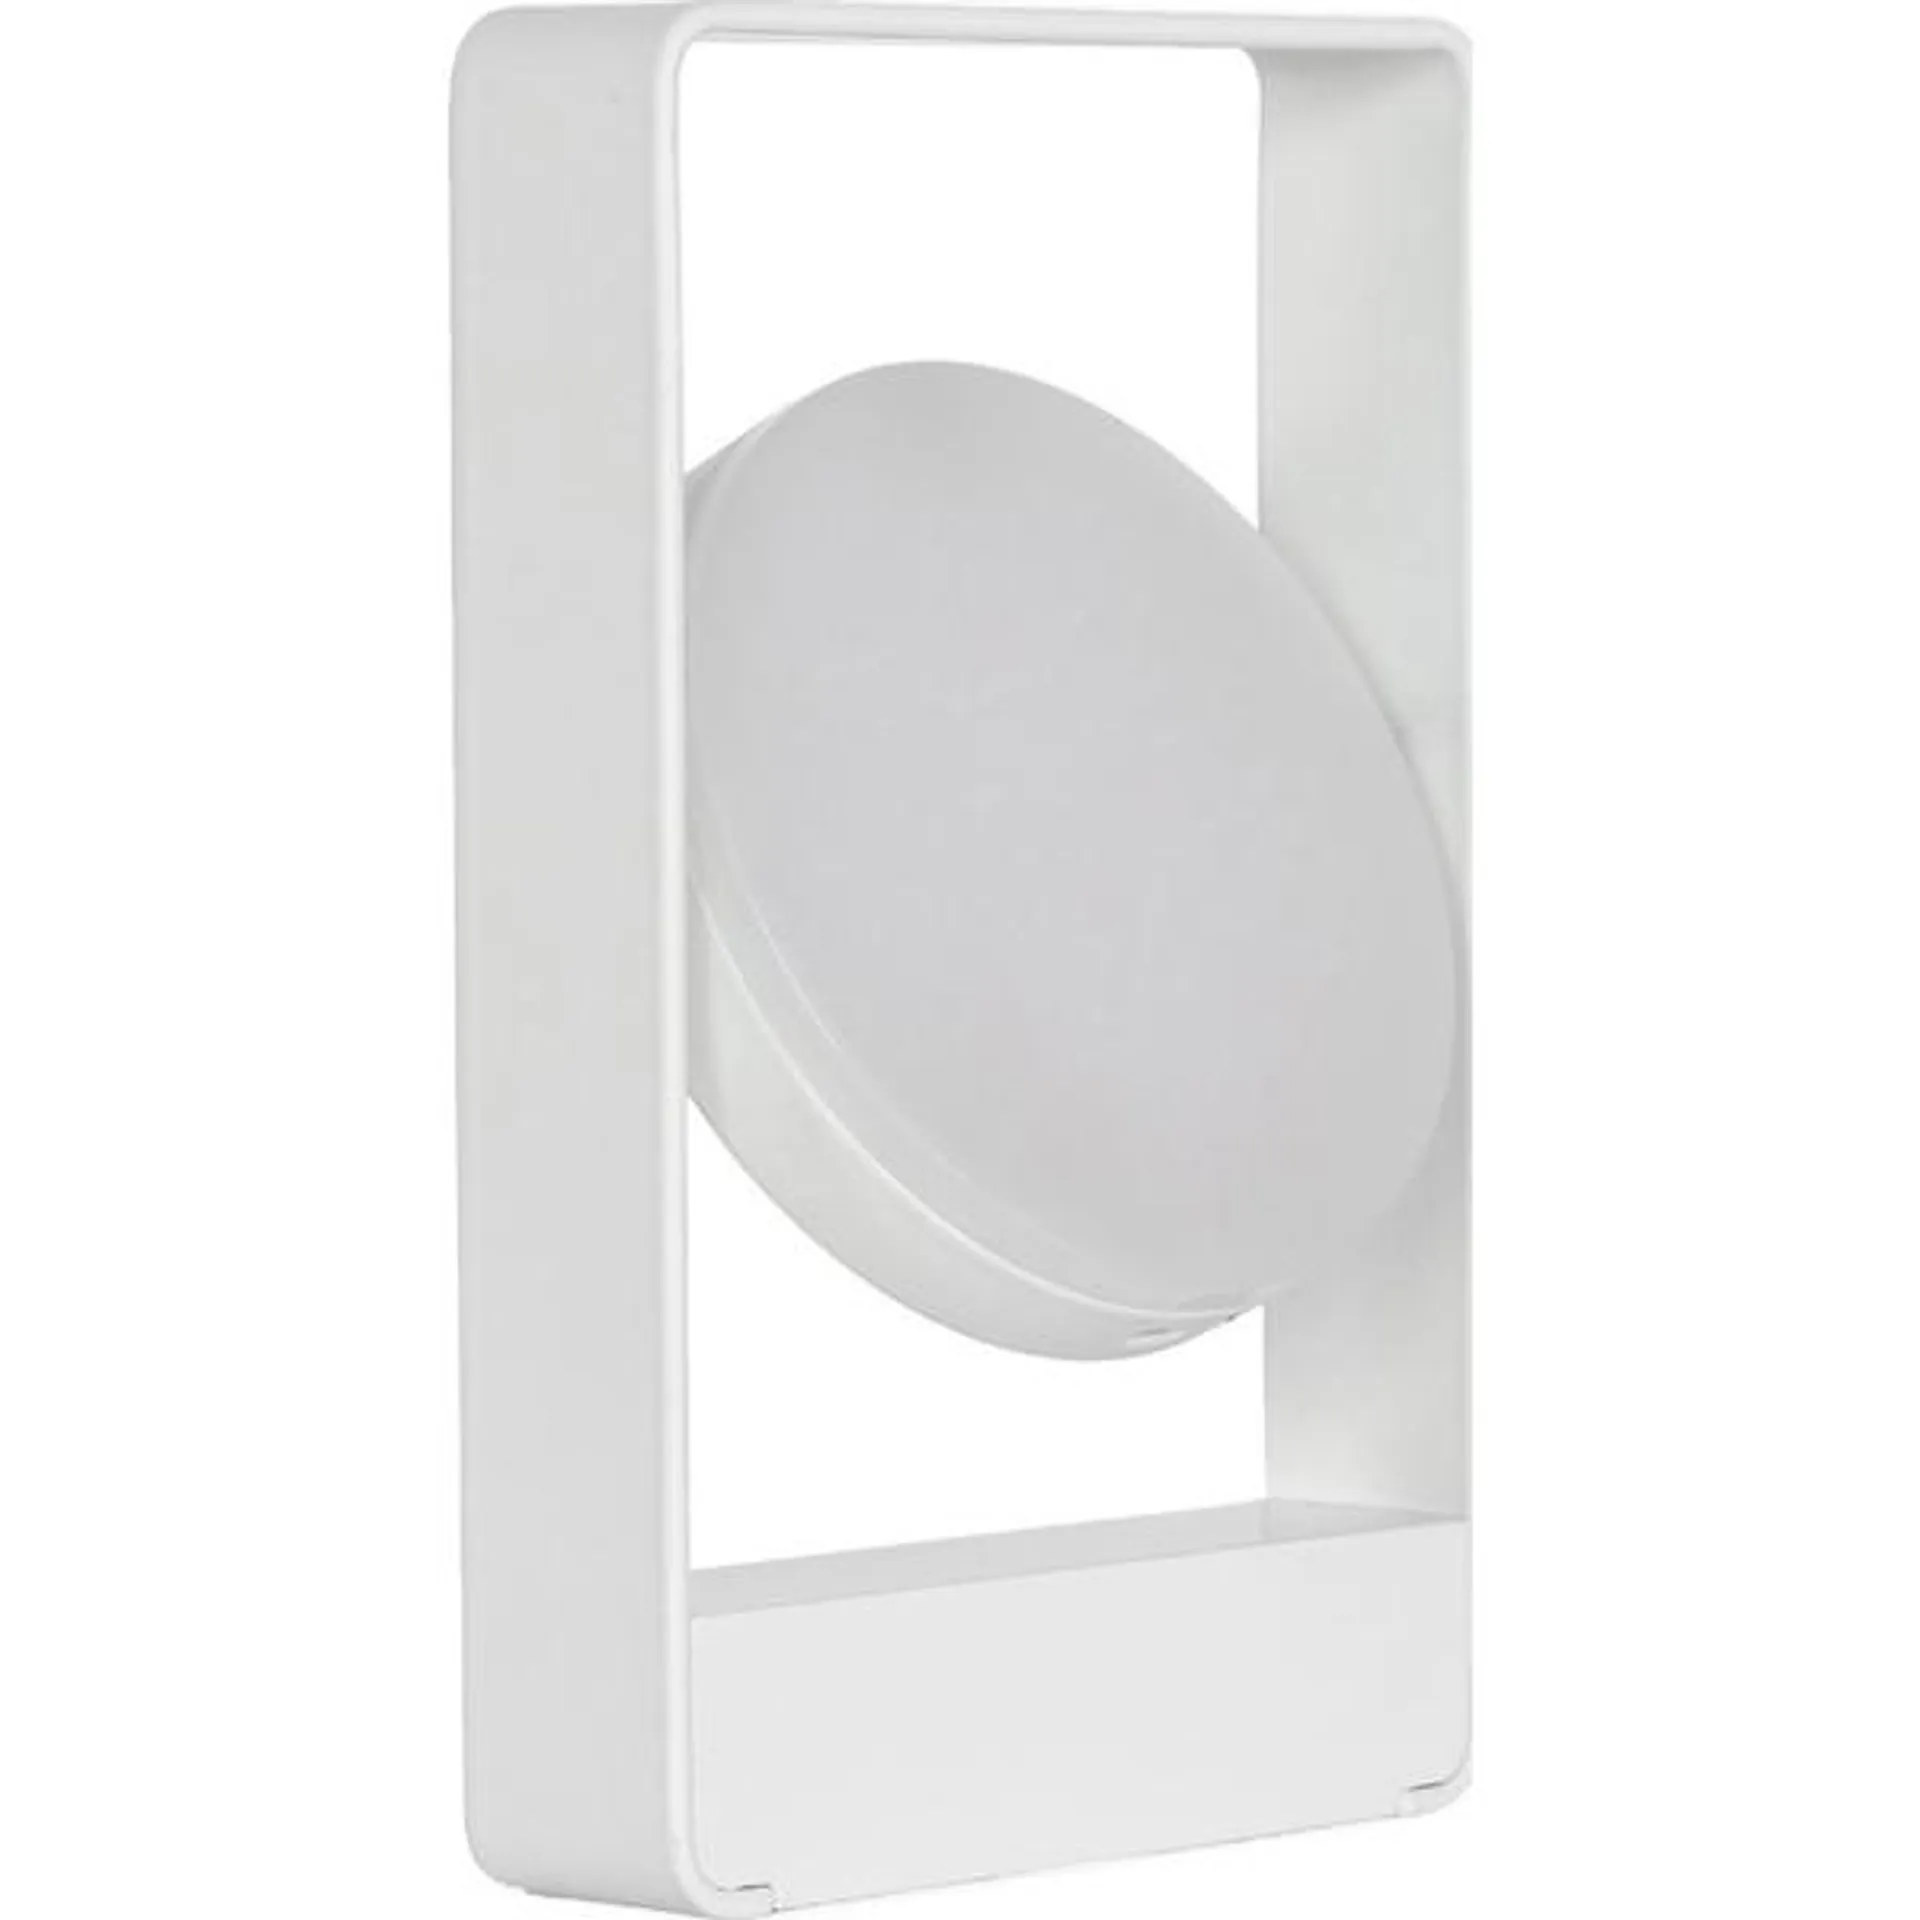 Case Furniture Mouro Table Light White - PP100WH